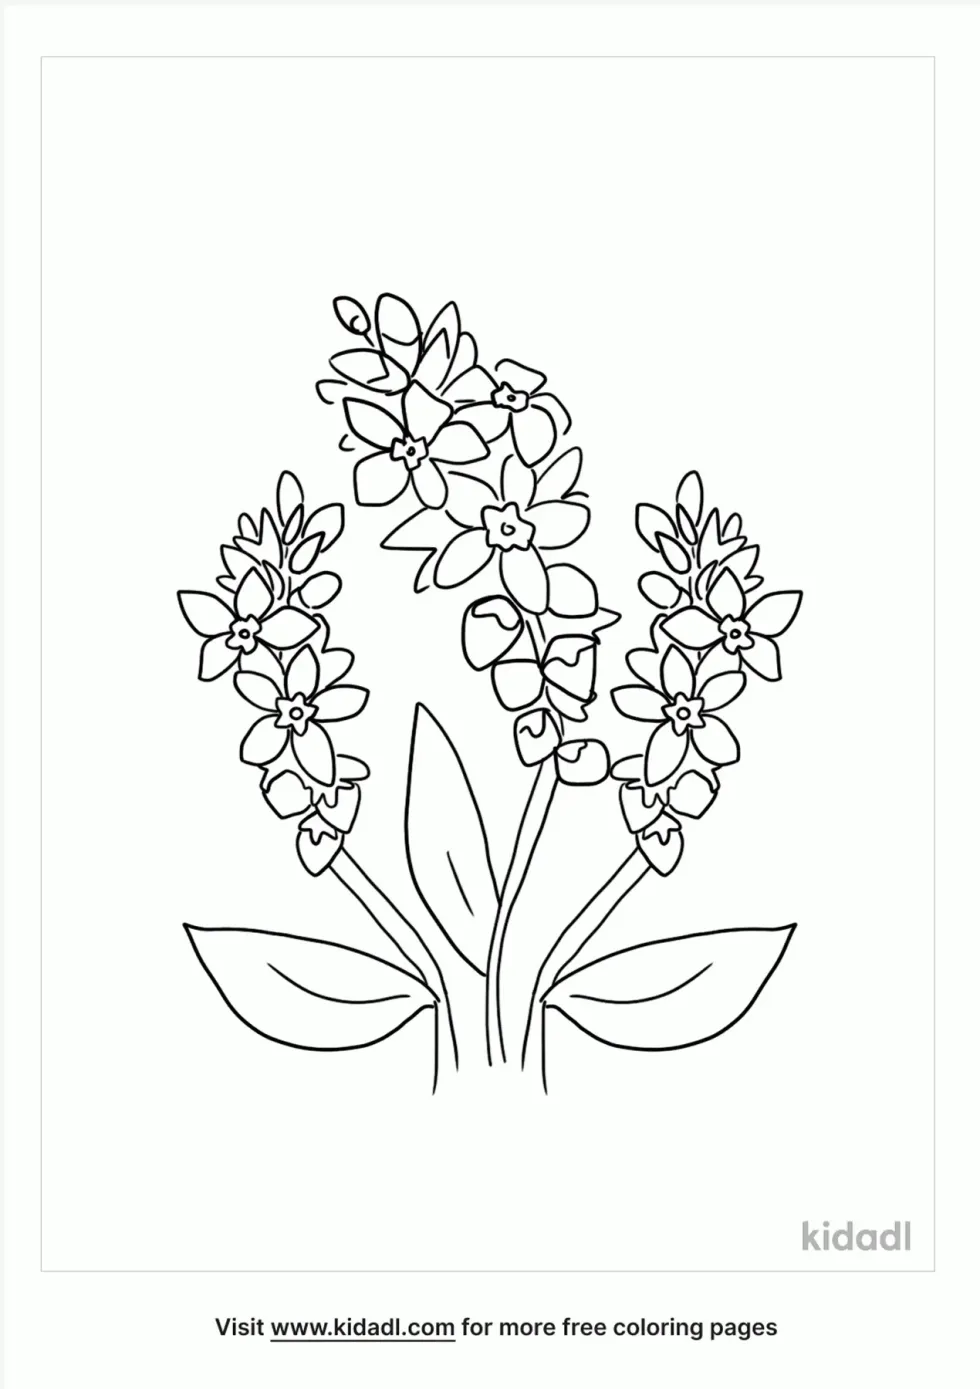 Buckwheat Coloring Page